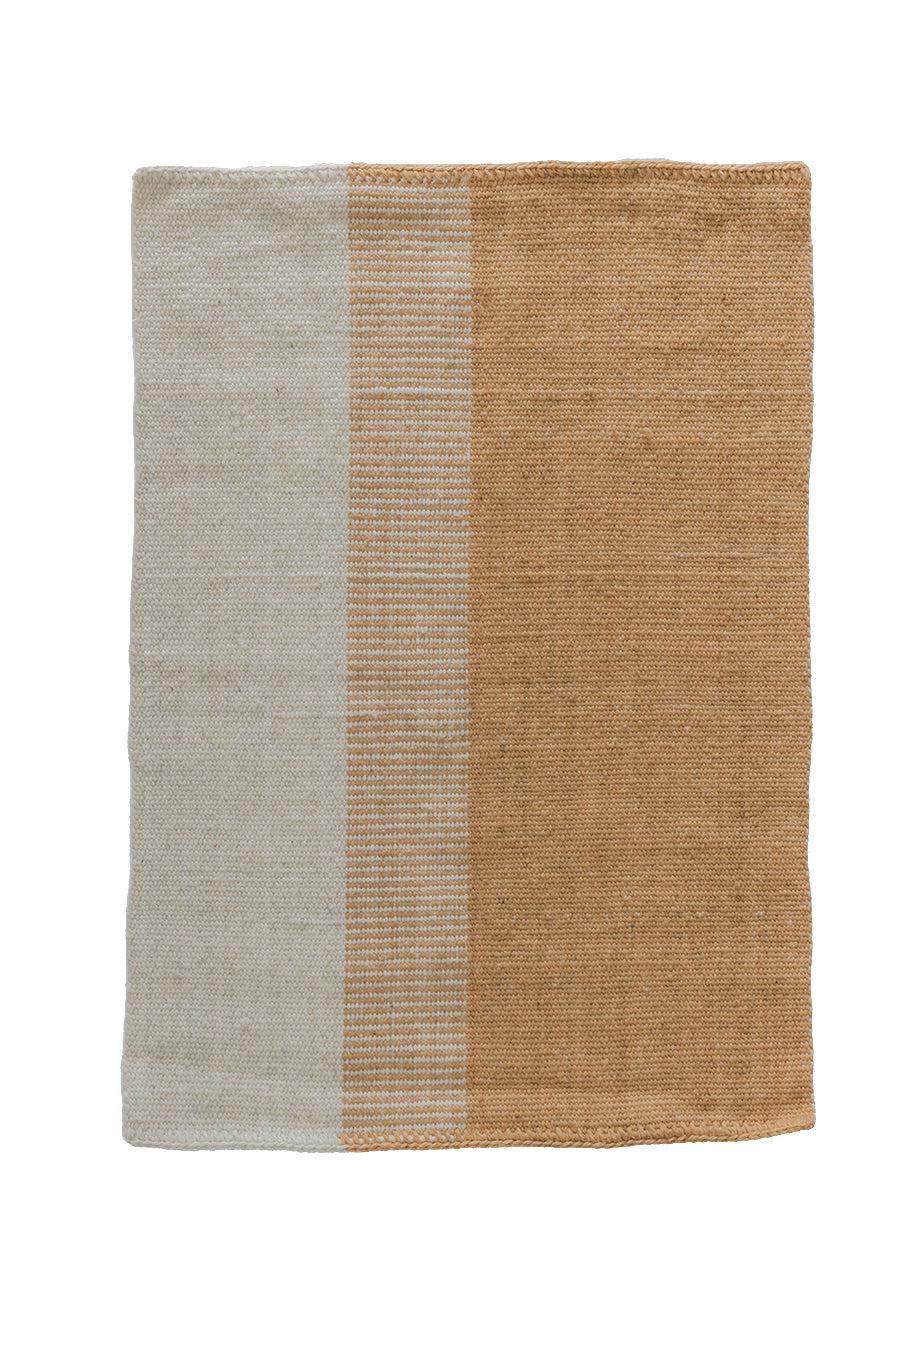 PLENA RUG | MINI #6 SAND & NATURAL-The Andes Project